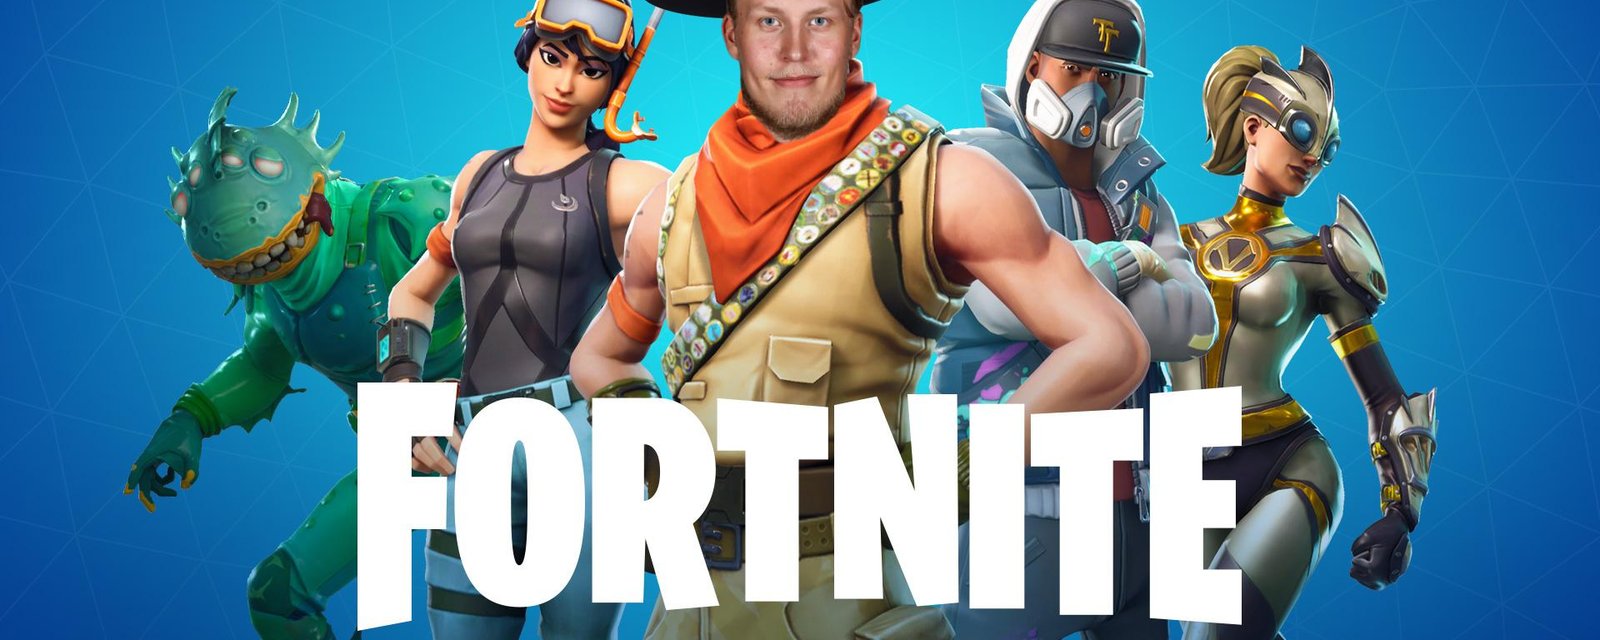 Two NHLers win huge amount playing Fortnite for charities 